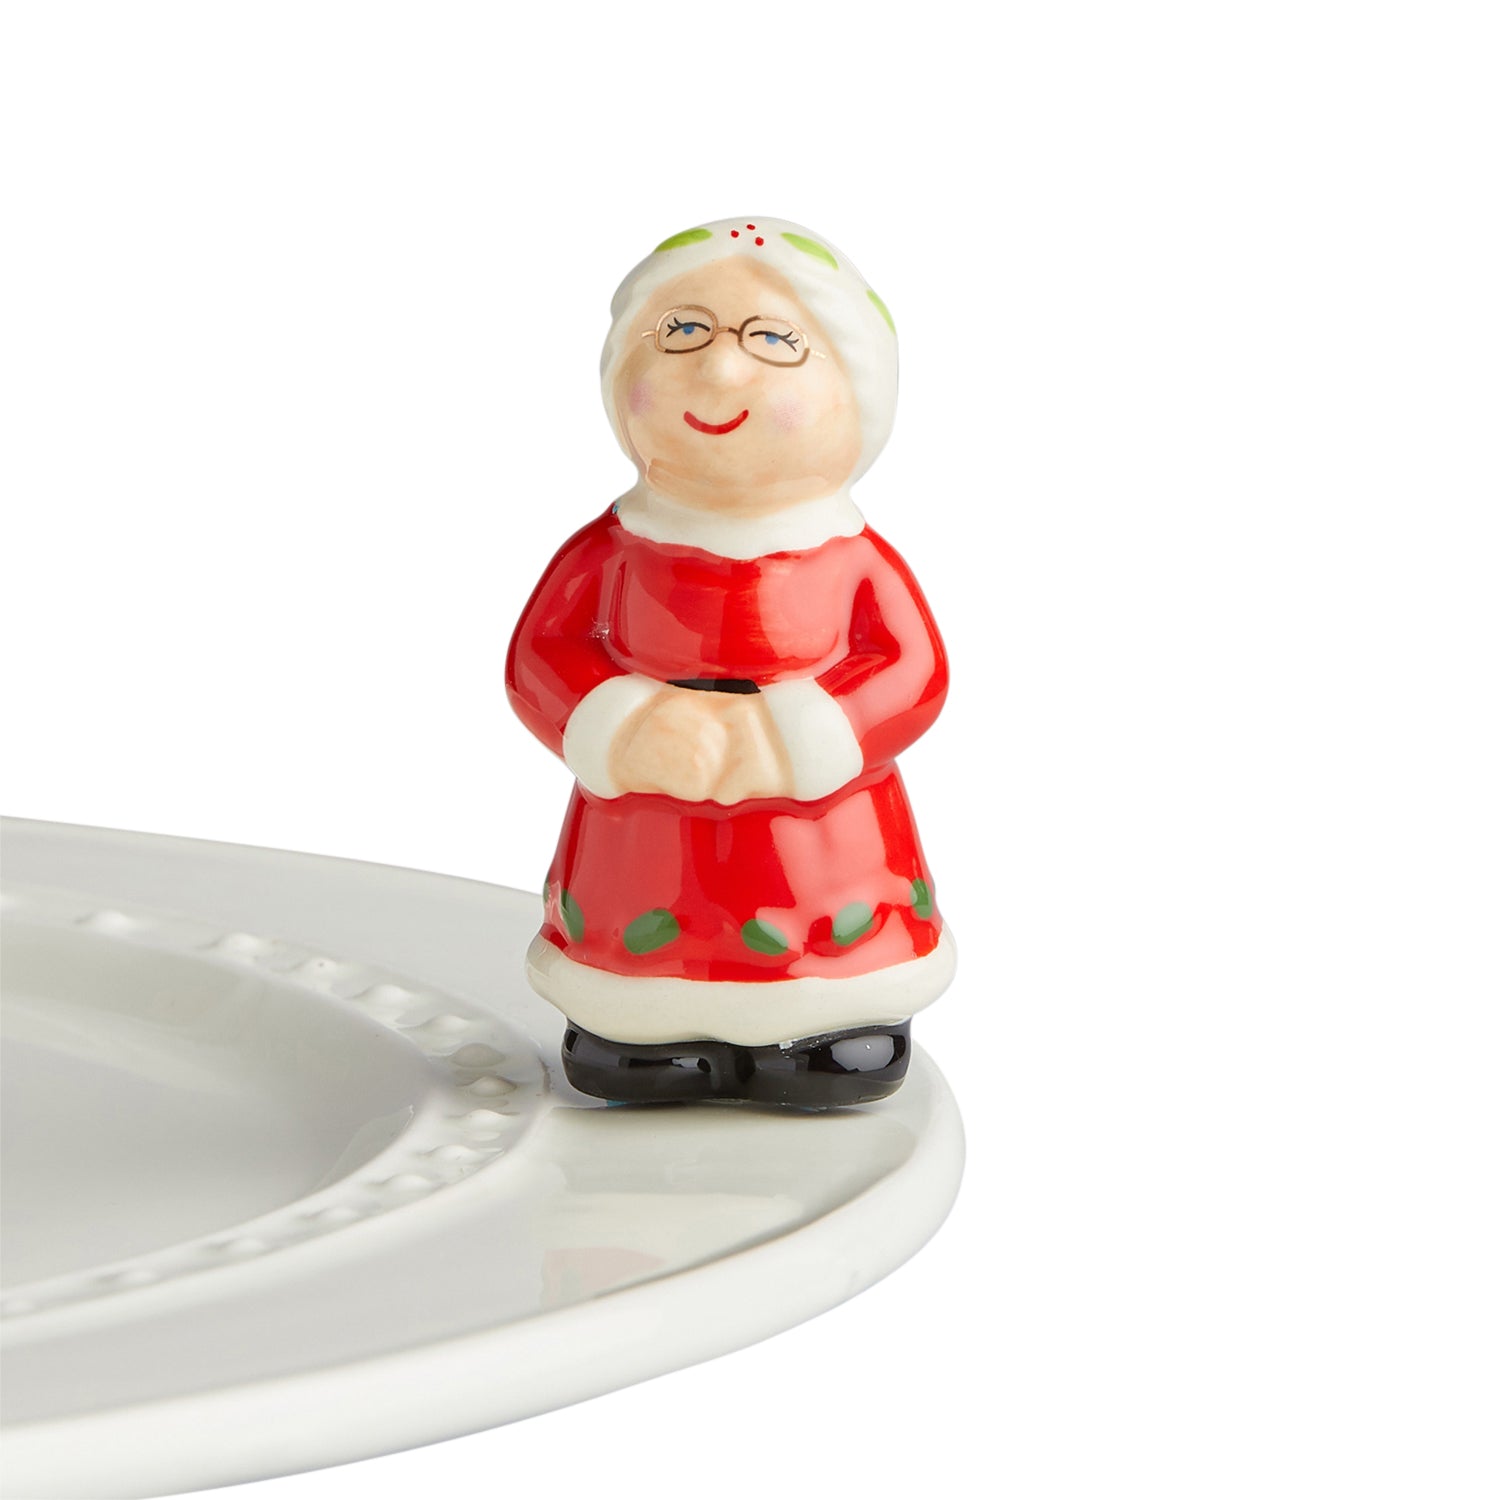 The Nora Fleming Mini Mrs. Claus is here! Mrs. Claus is stepping in to give Santa a helping hand! You’ll love her cute red dress and her wire-rimmed glasses, too! Pair her with Santa for the perfect Christmas setting! 